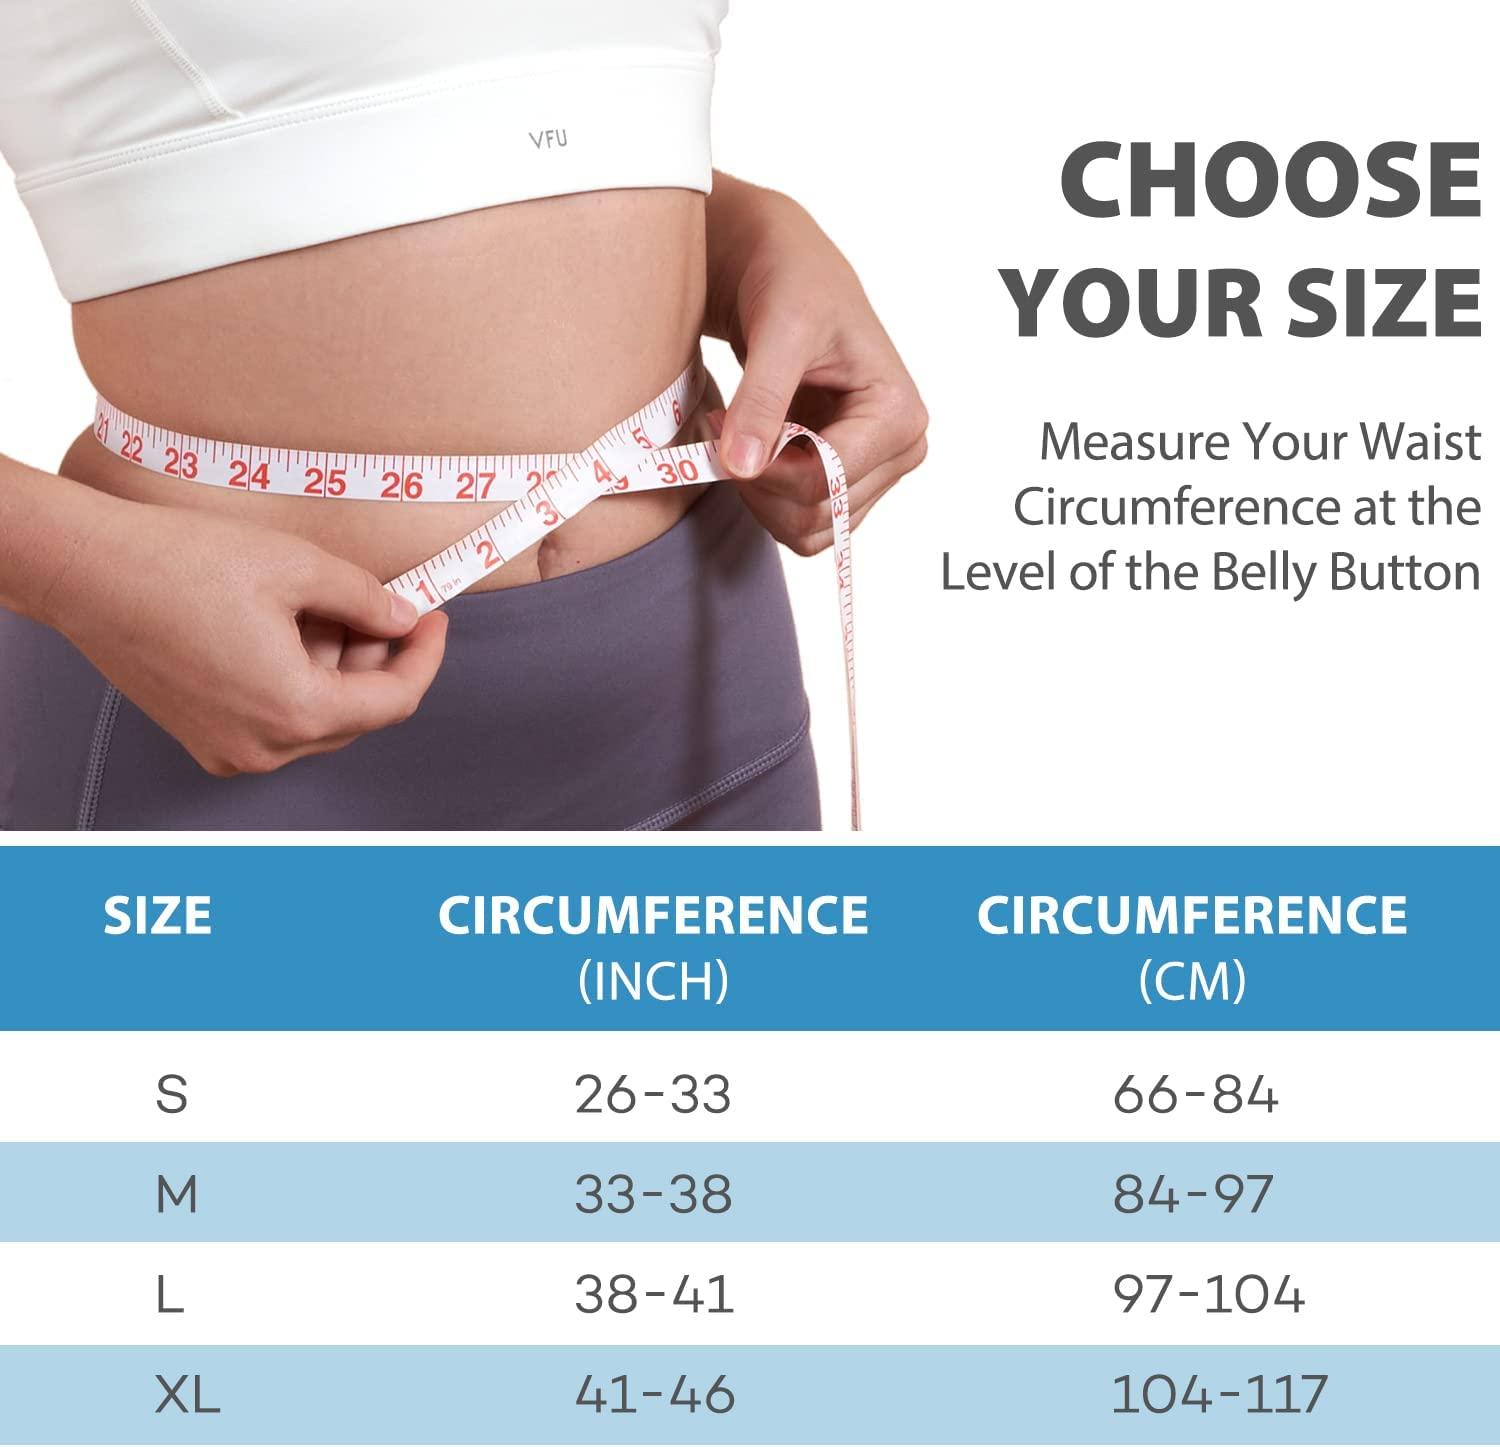 How to measure your waist circumference 